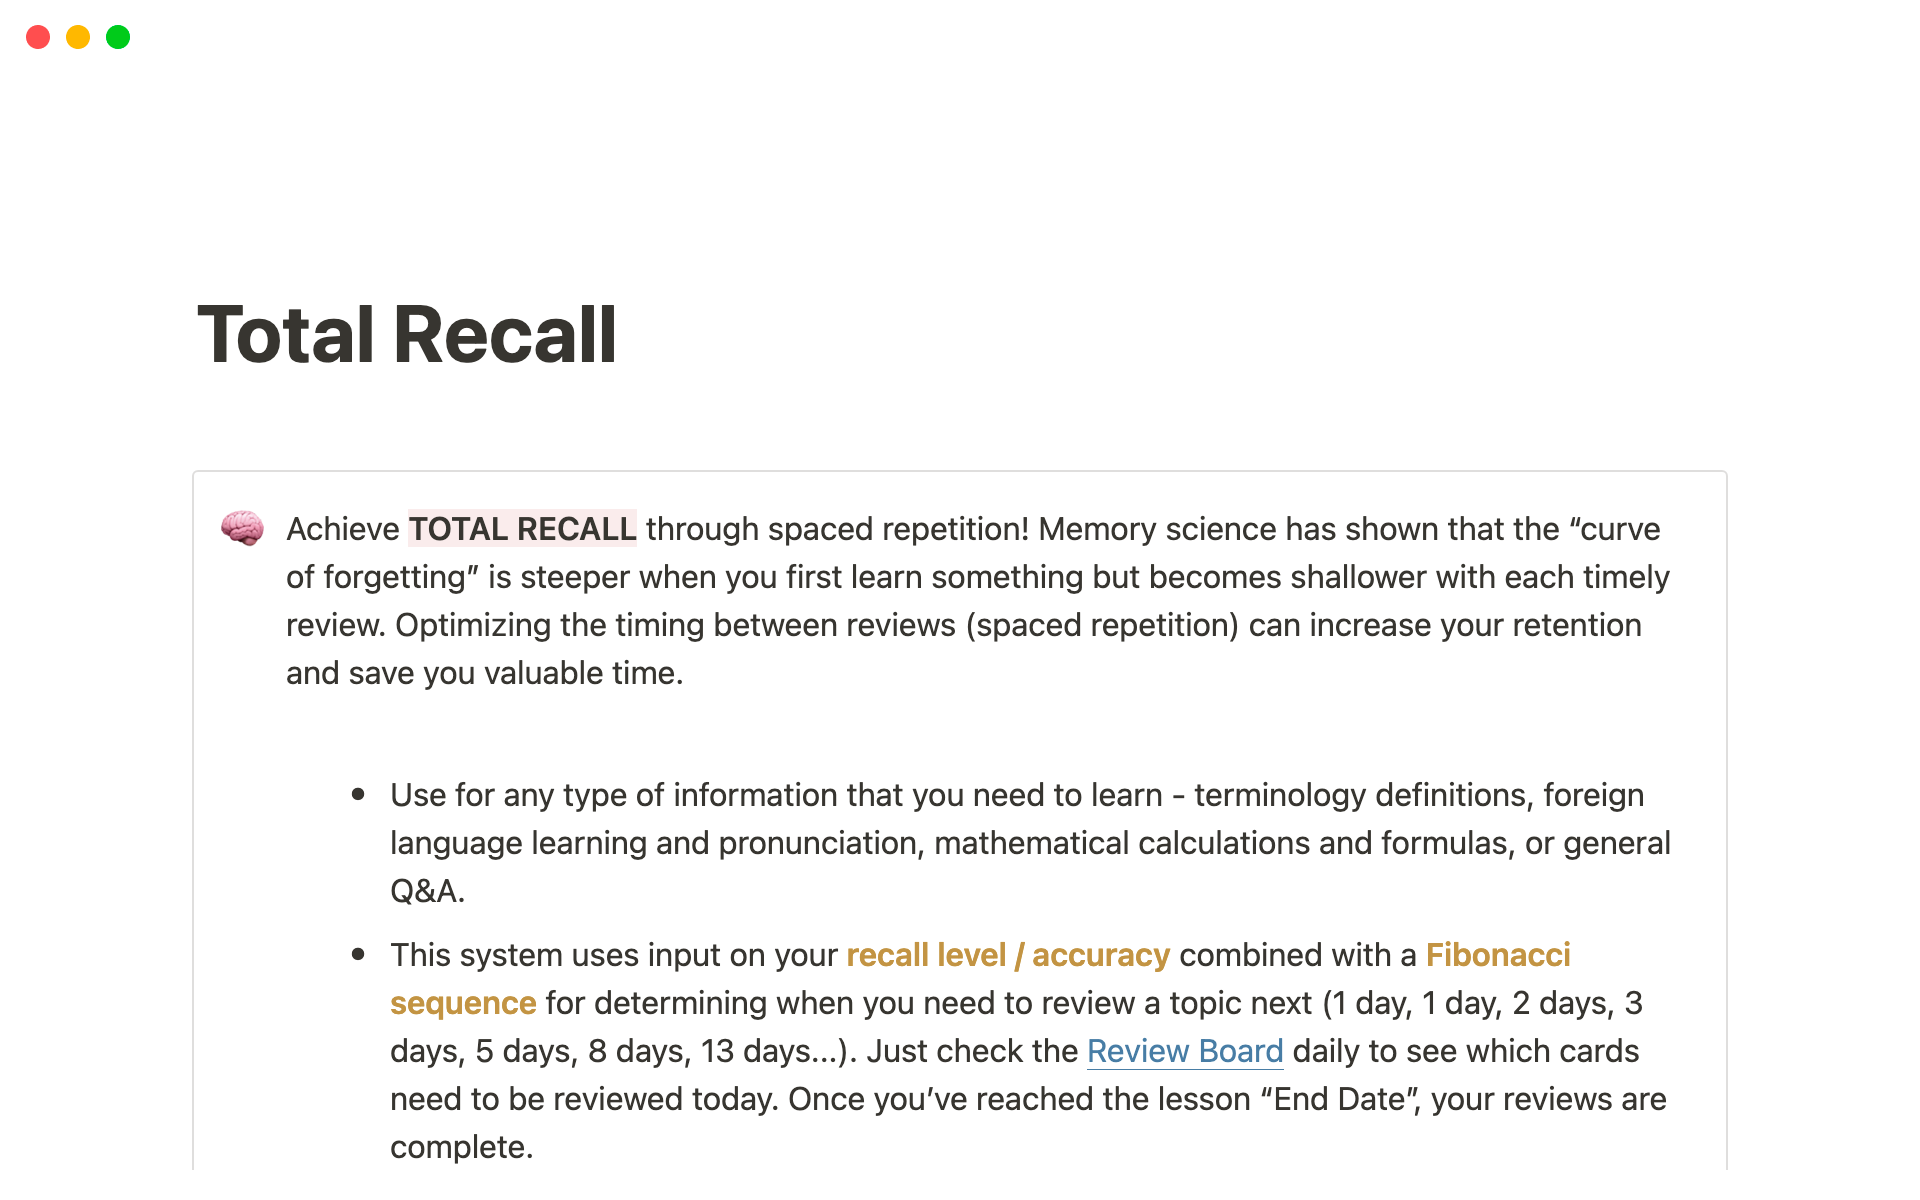 Achieve total recall through spaced repetition.